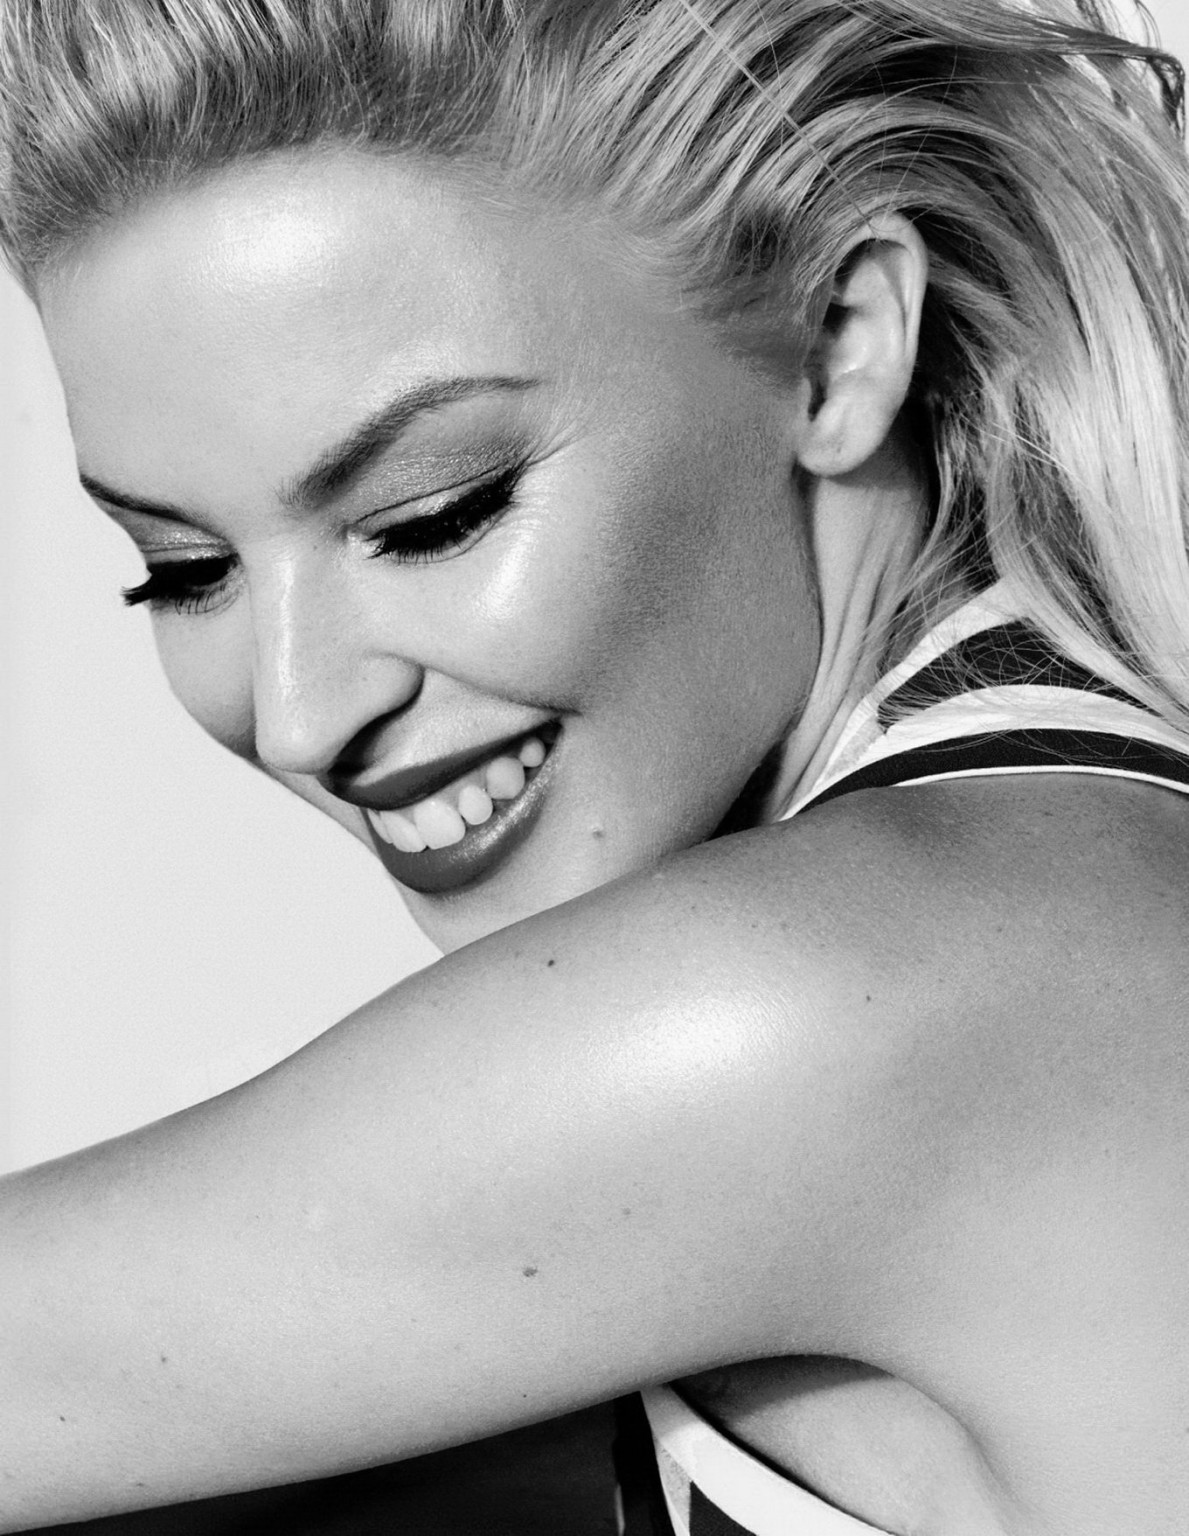 Kylie Minogue looking very sexy in her official 2014 calendar photoshoot #75215340